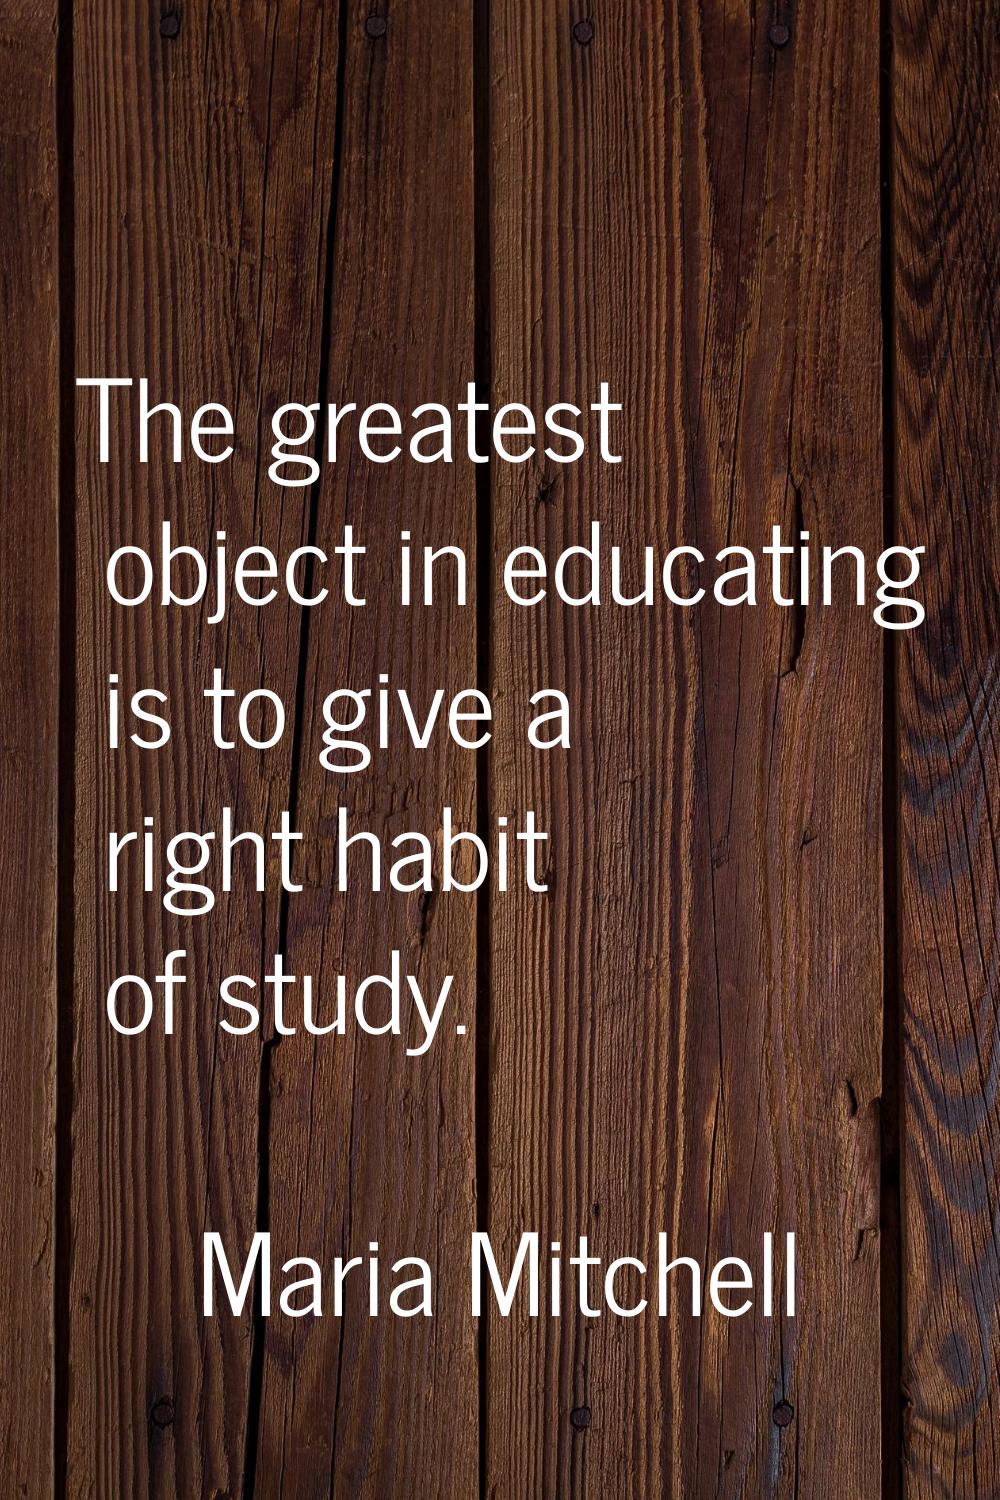 The greatest object in educating is to give a right habit of study.